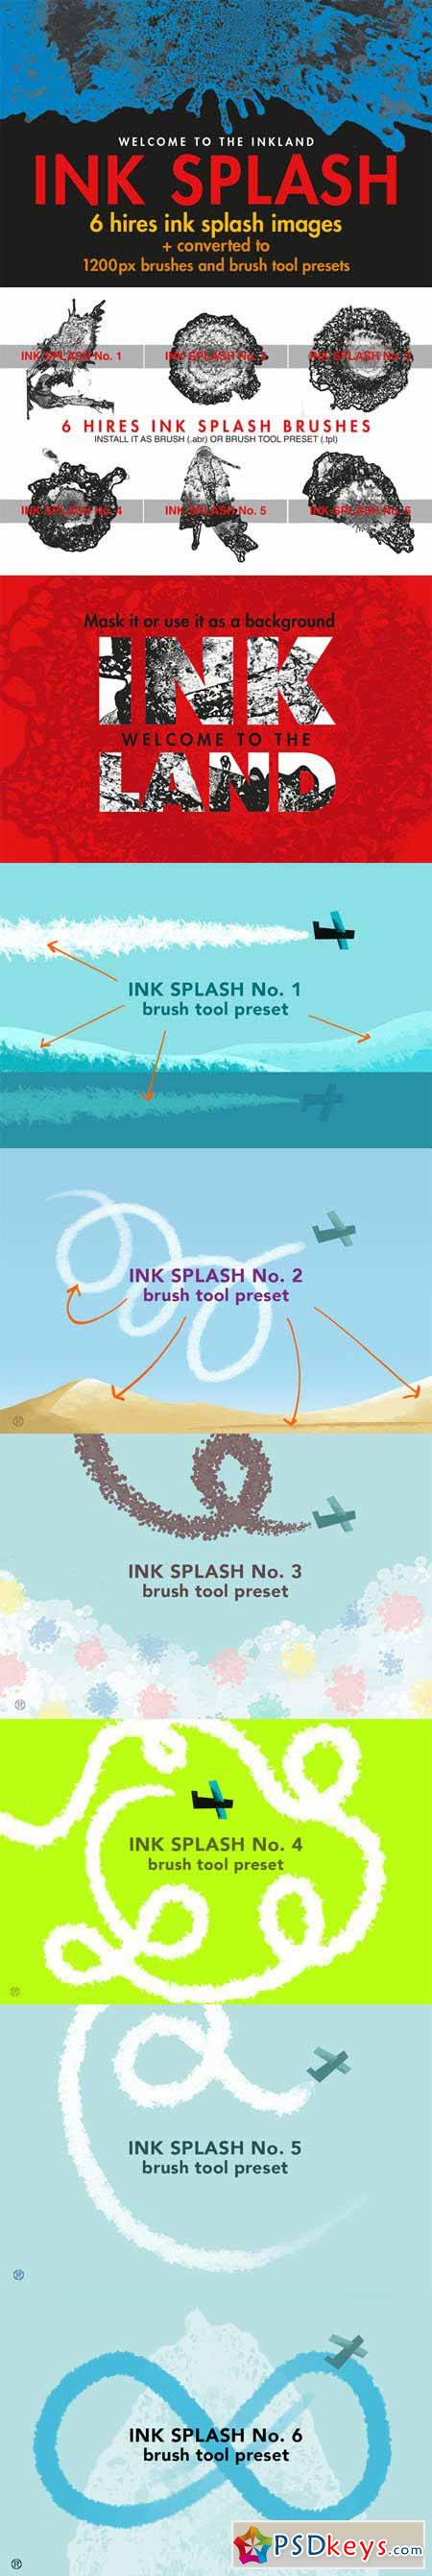 Ink Splash - 6 Images and Brushes 492920